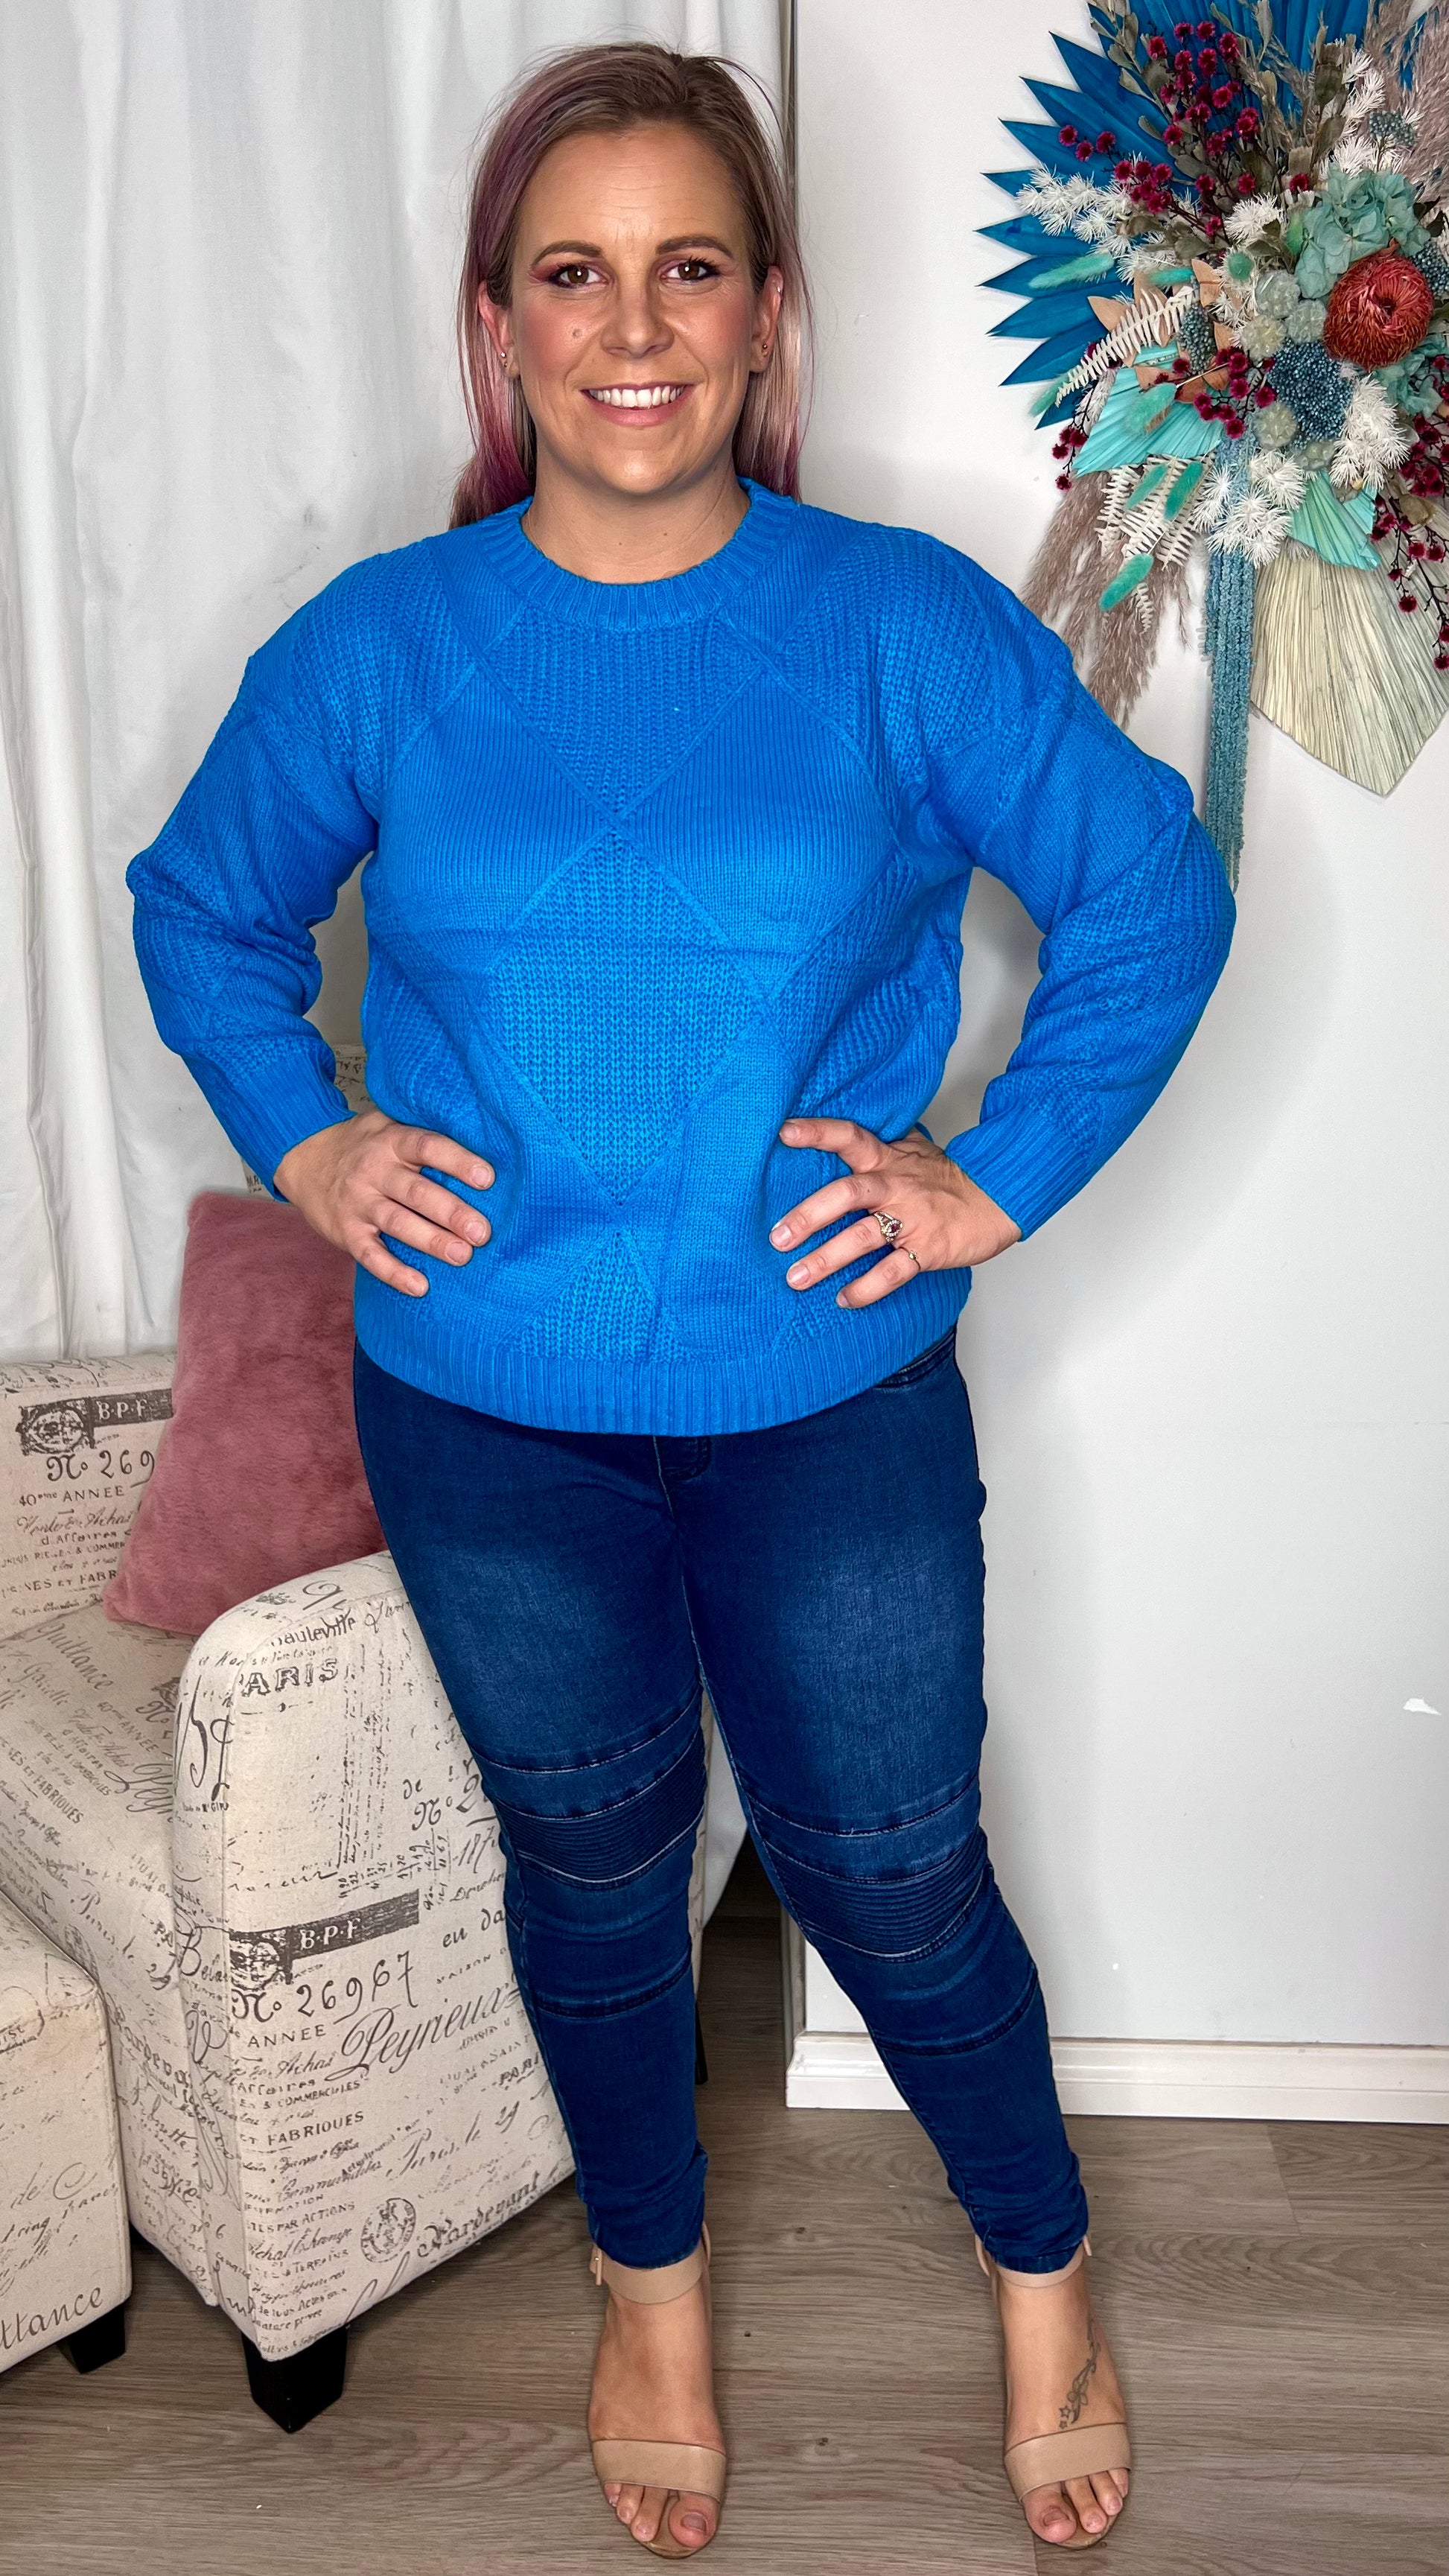 Marcia Knit Jumper: Photos do not do this piece justice. The Marcia Knit comes in two amazing vibrant colours that will brighten up the gloomiest day
Features:

Knit

Sizing: This item  - Ciao Bella Dresses 